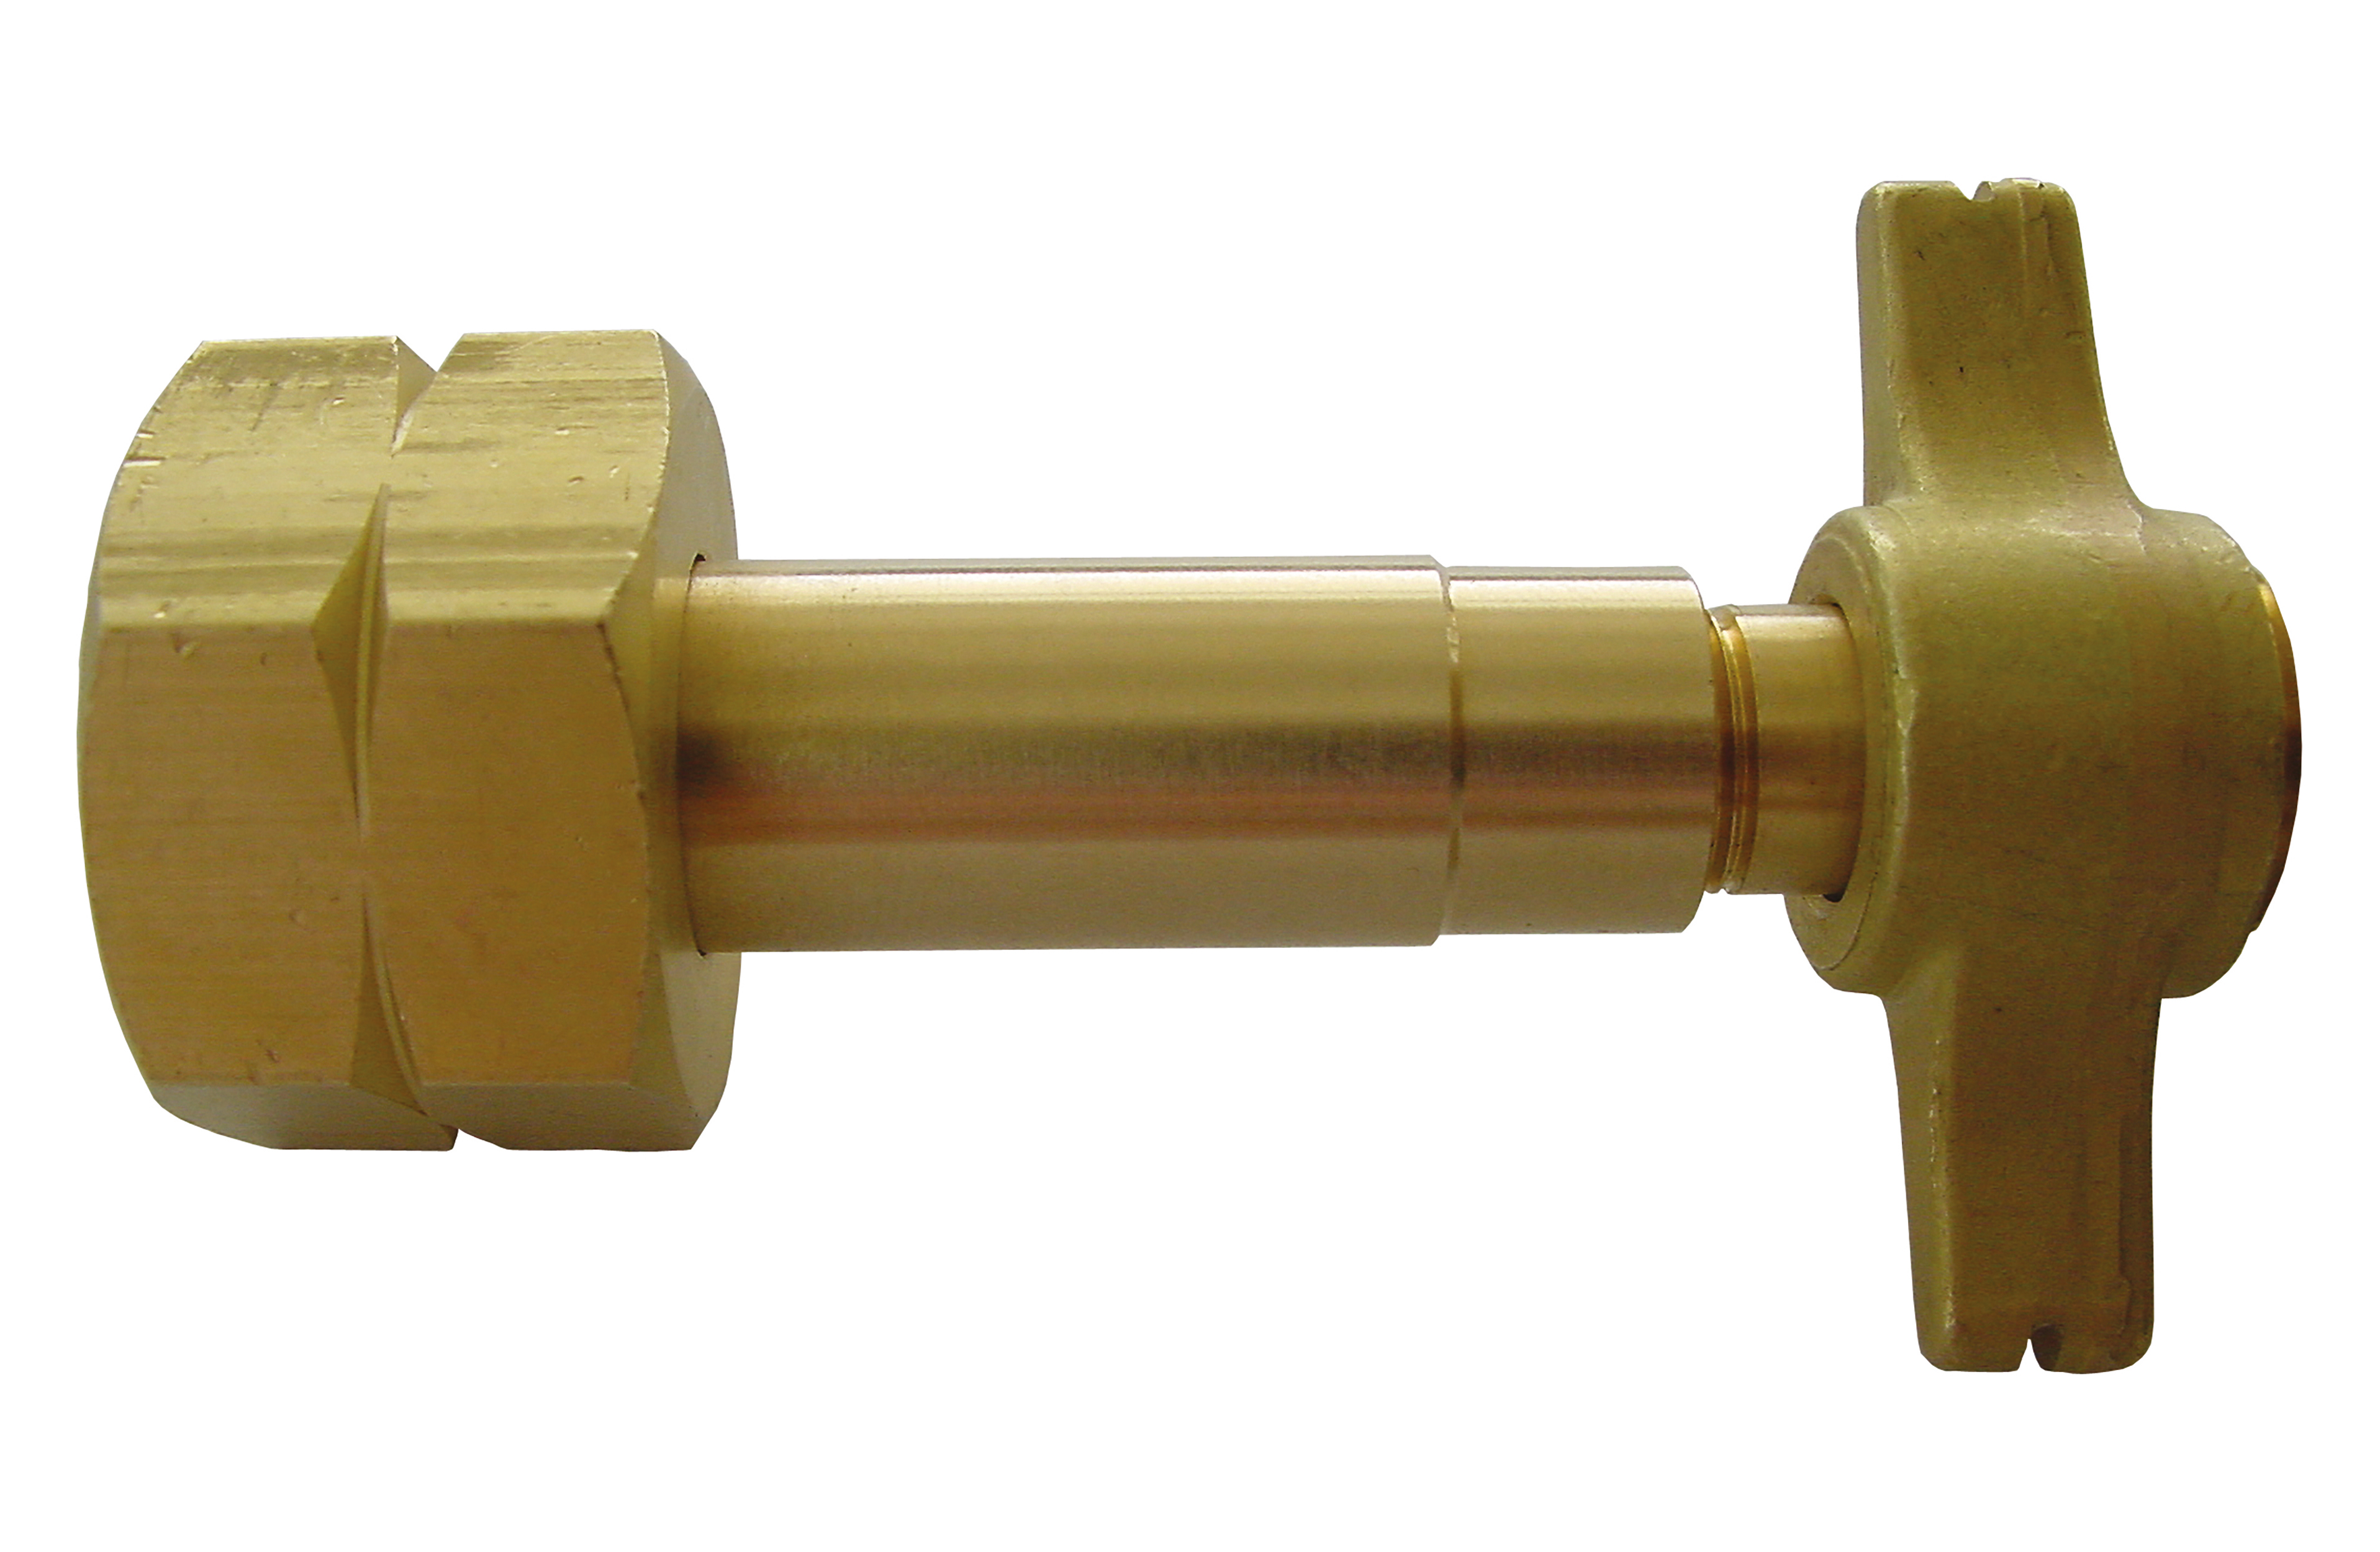 Refill adapter for propane tanks, combined connection: W 21.8 × 14 threads LH, outlet: G⅜ LH female